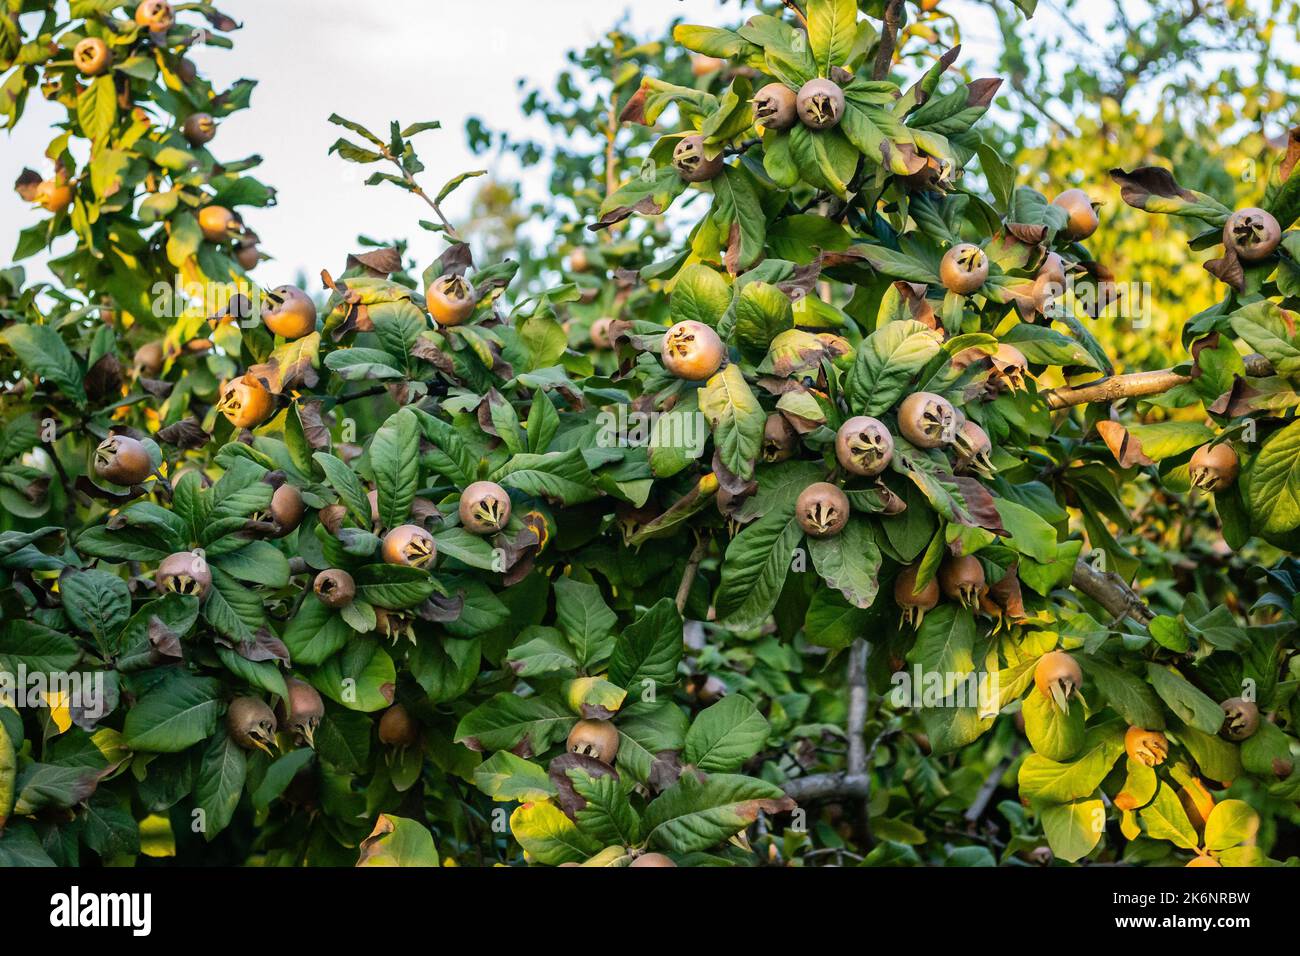 Medlar fruits on a branch. Ripe medlar fruits in the crown of the tree on the branches. Stock Photo